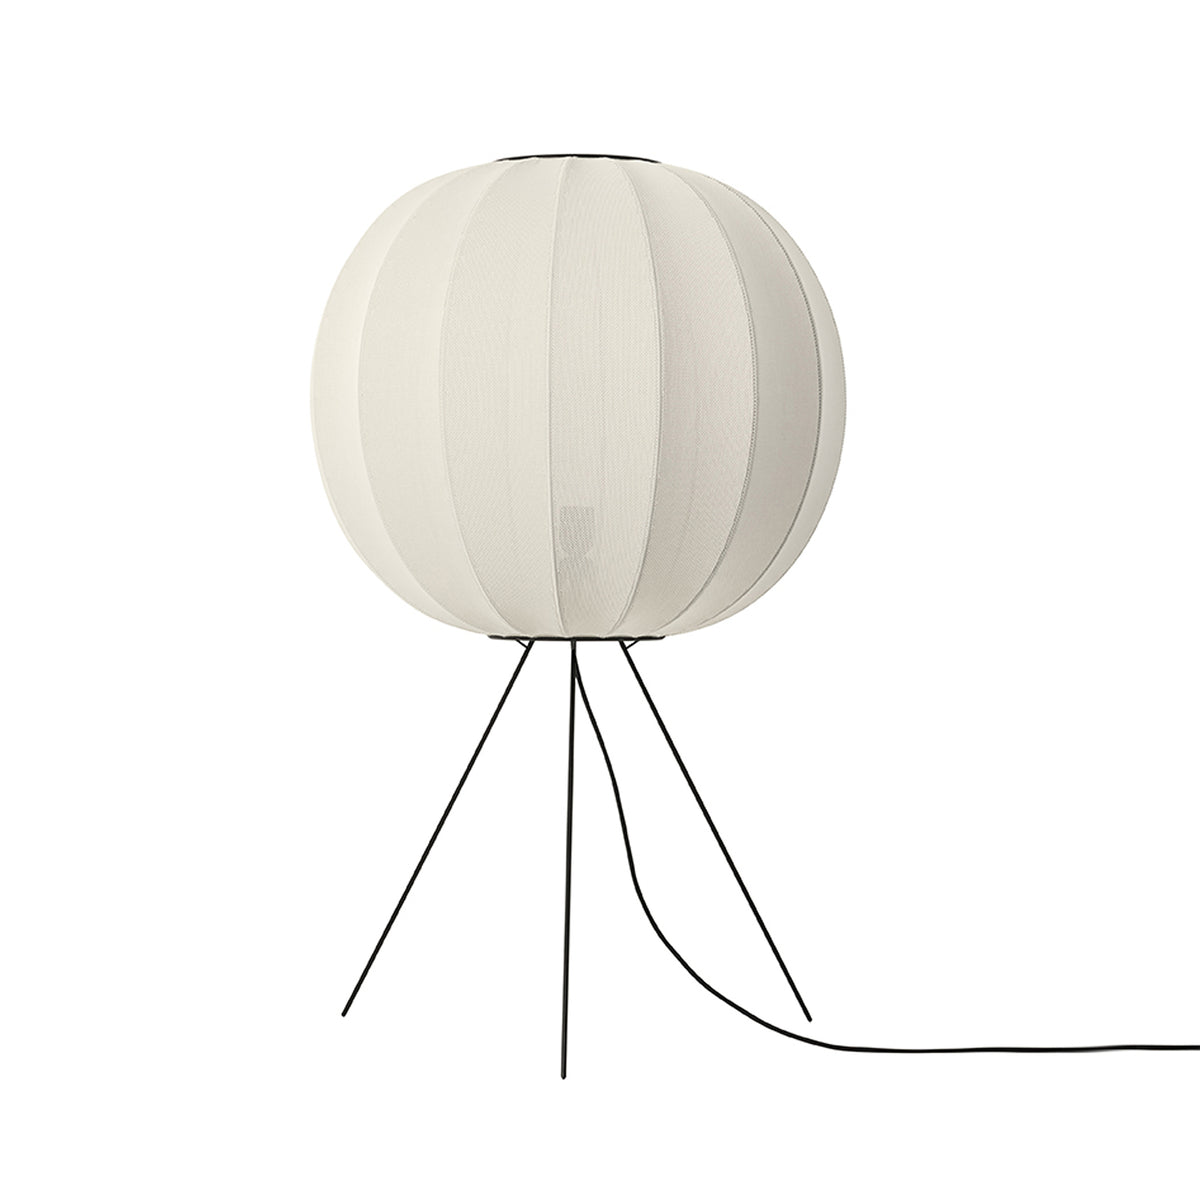 Made by Hand, Knit-Wit Medium Floor Lamp 60, Pearl White, Floor,